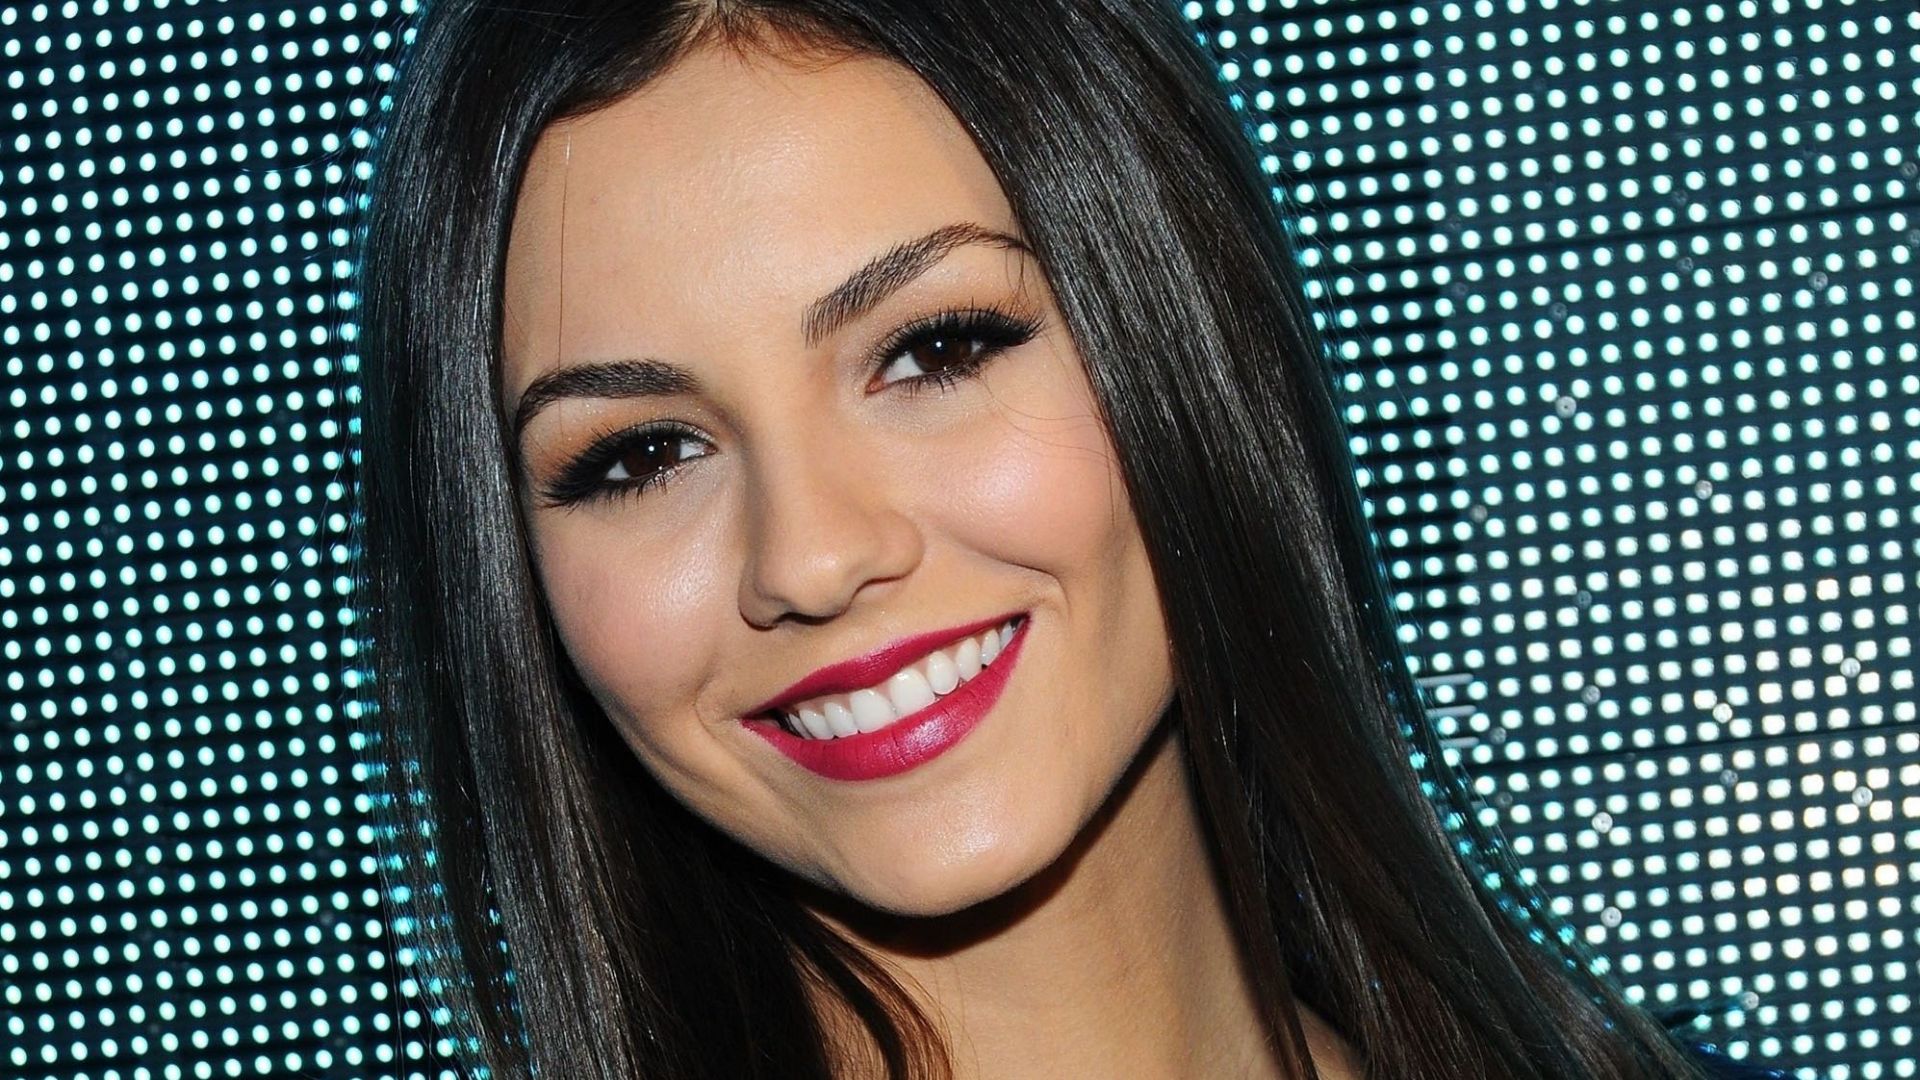 Wallpaper Victoria justice, smiling face, famous actress